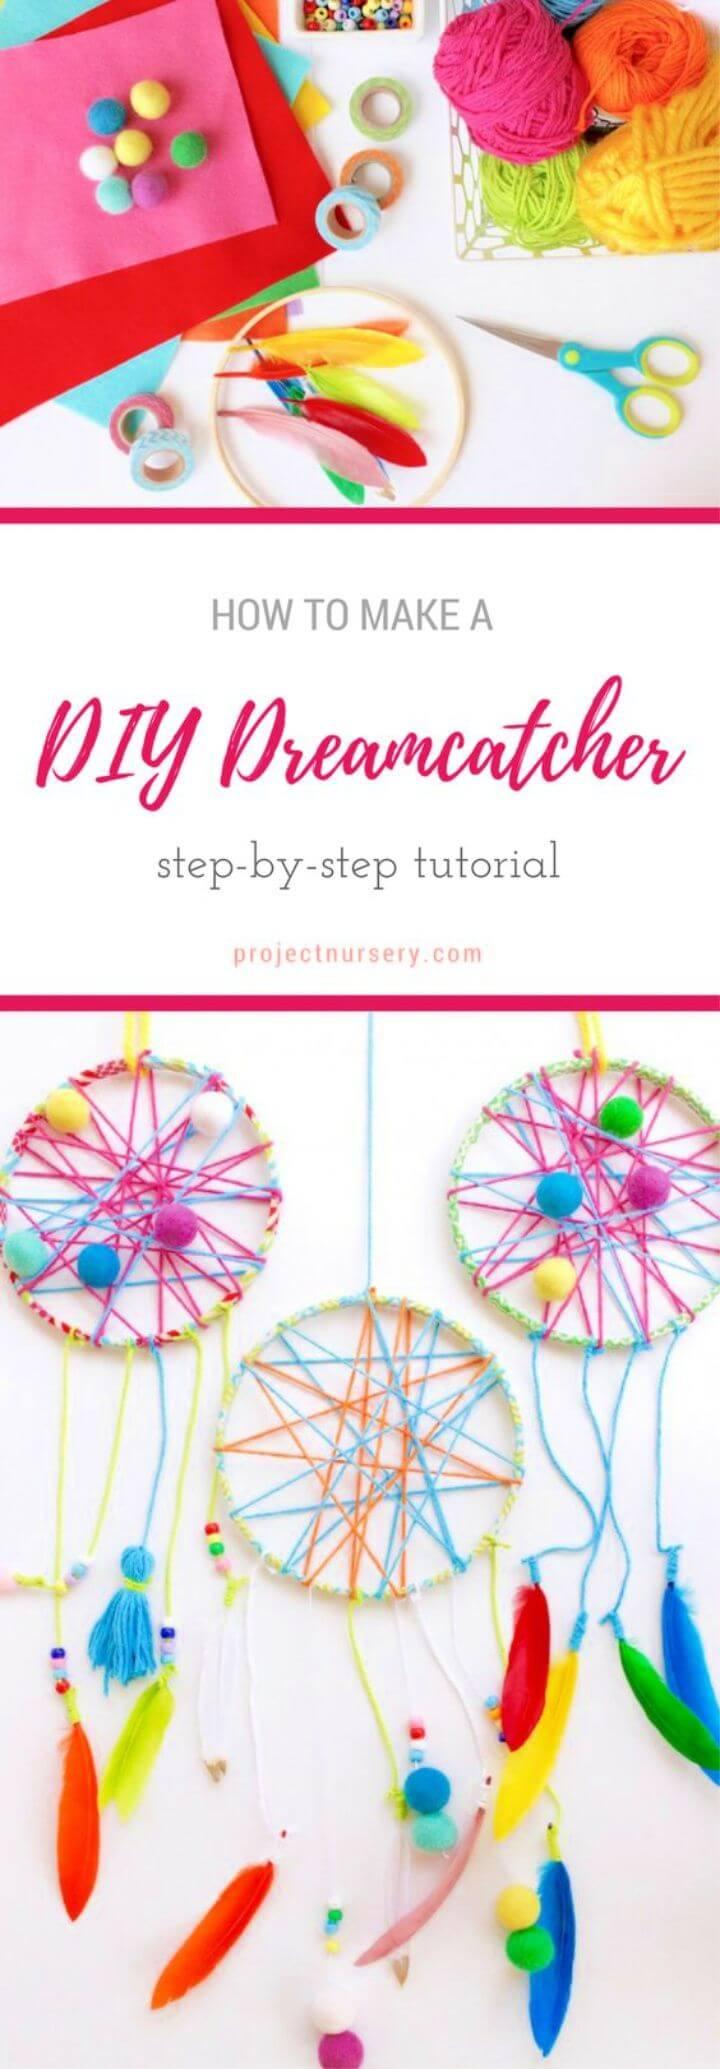 Start Catching Dreams with this Whimsical DIY